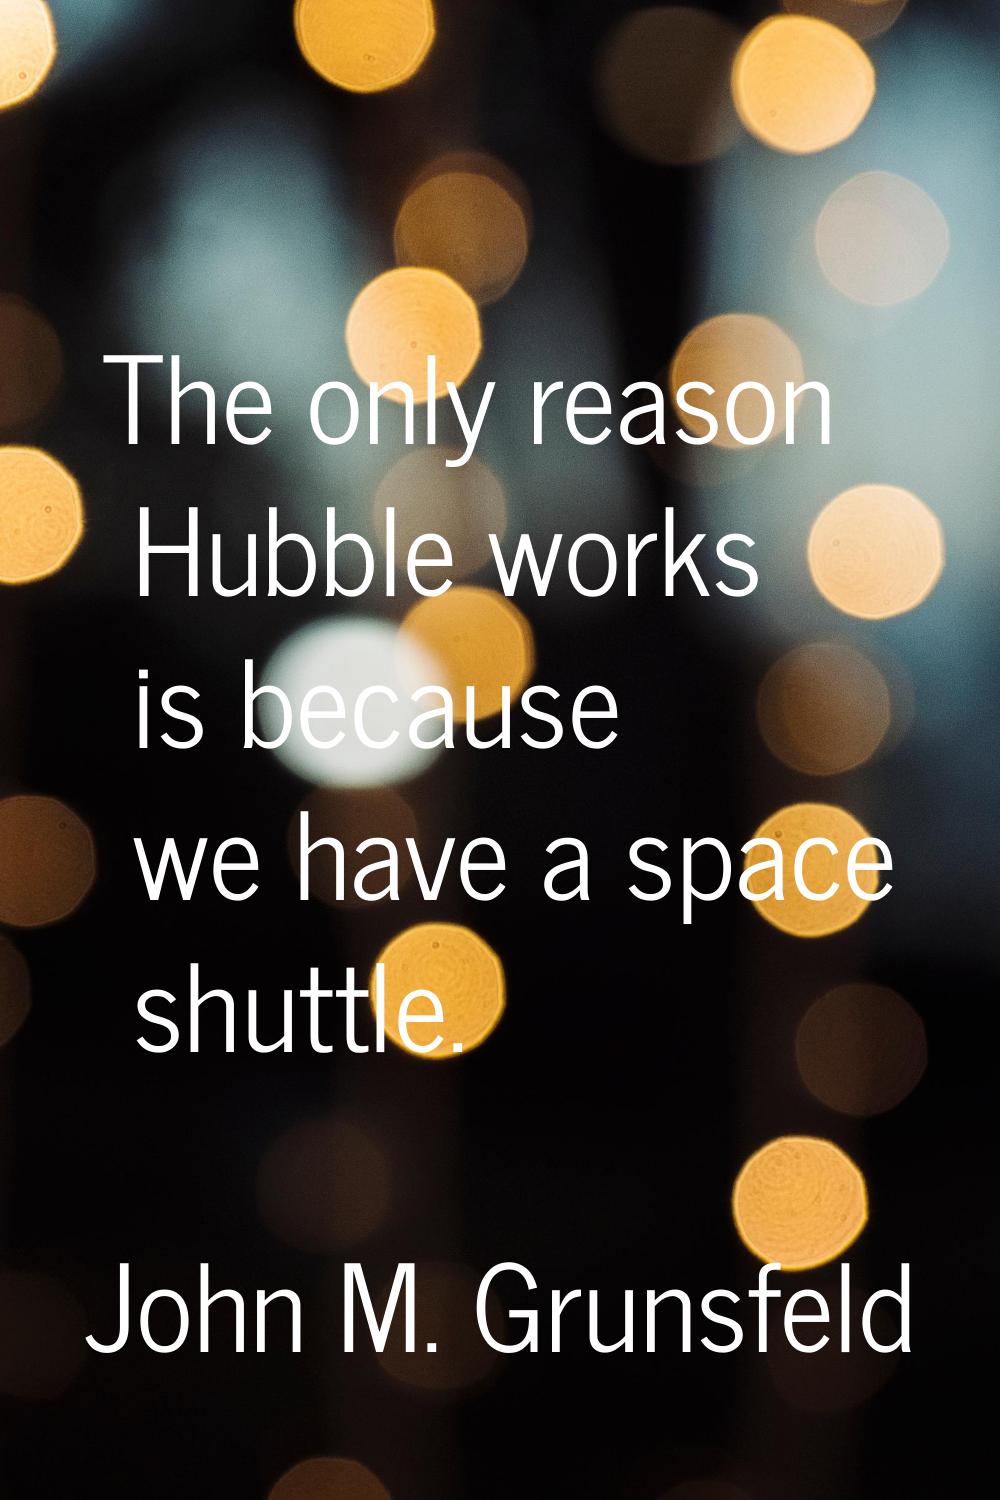 The only reason Hubble works is because we have a space shuttle.